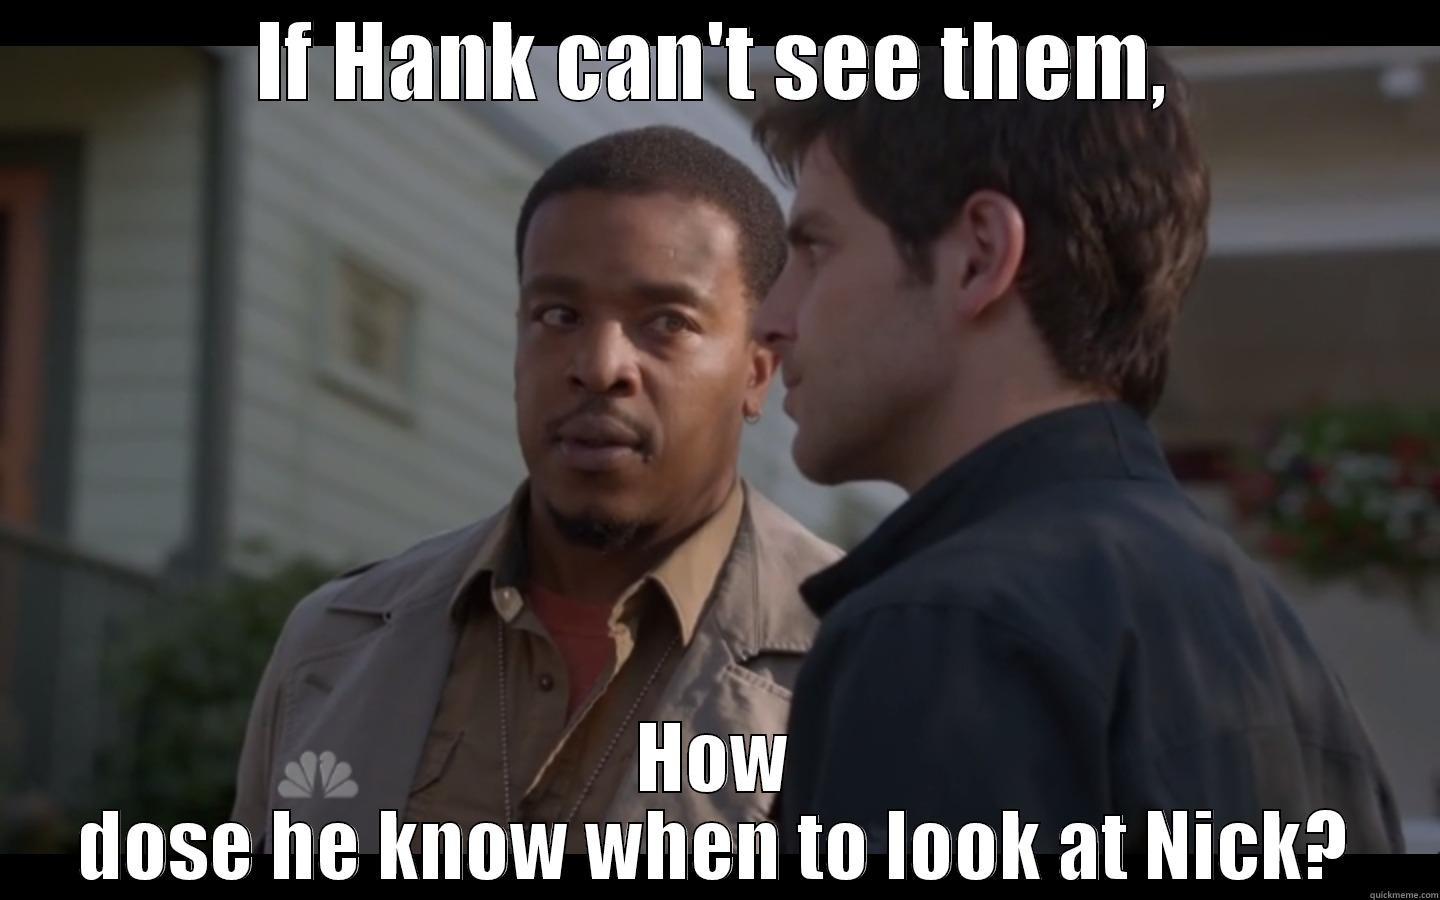 what i don't understand about grimm - IF HANK CAN'T SEE THEM, HOW DOSE HE KNOW WHEN TO LOOK AT NICK? Misc